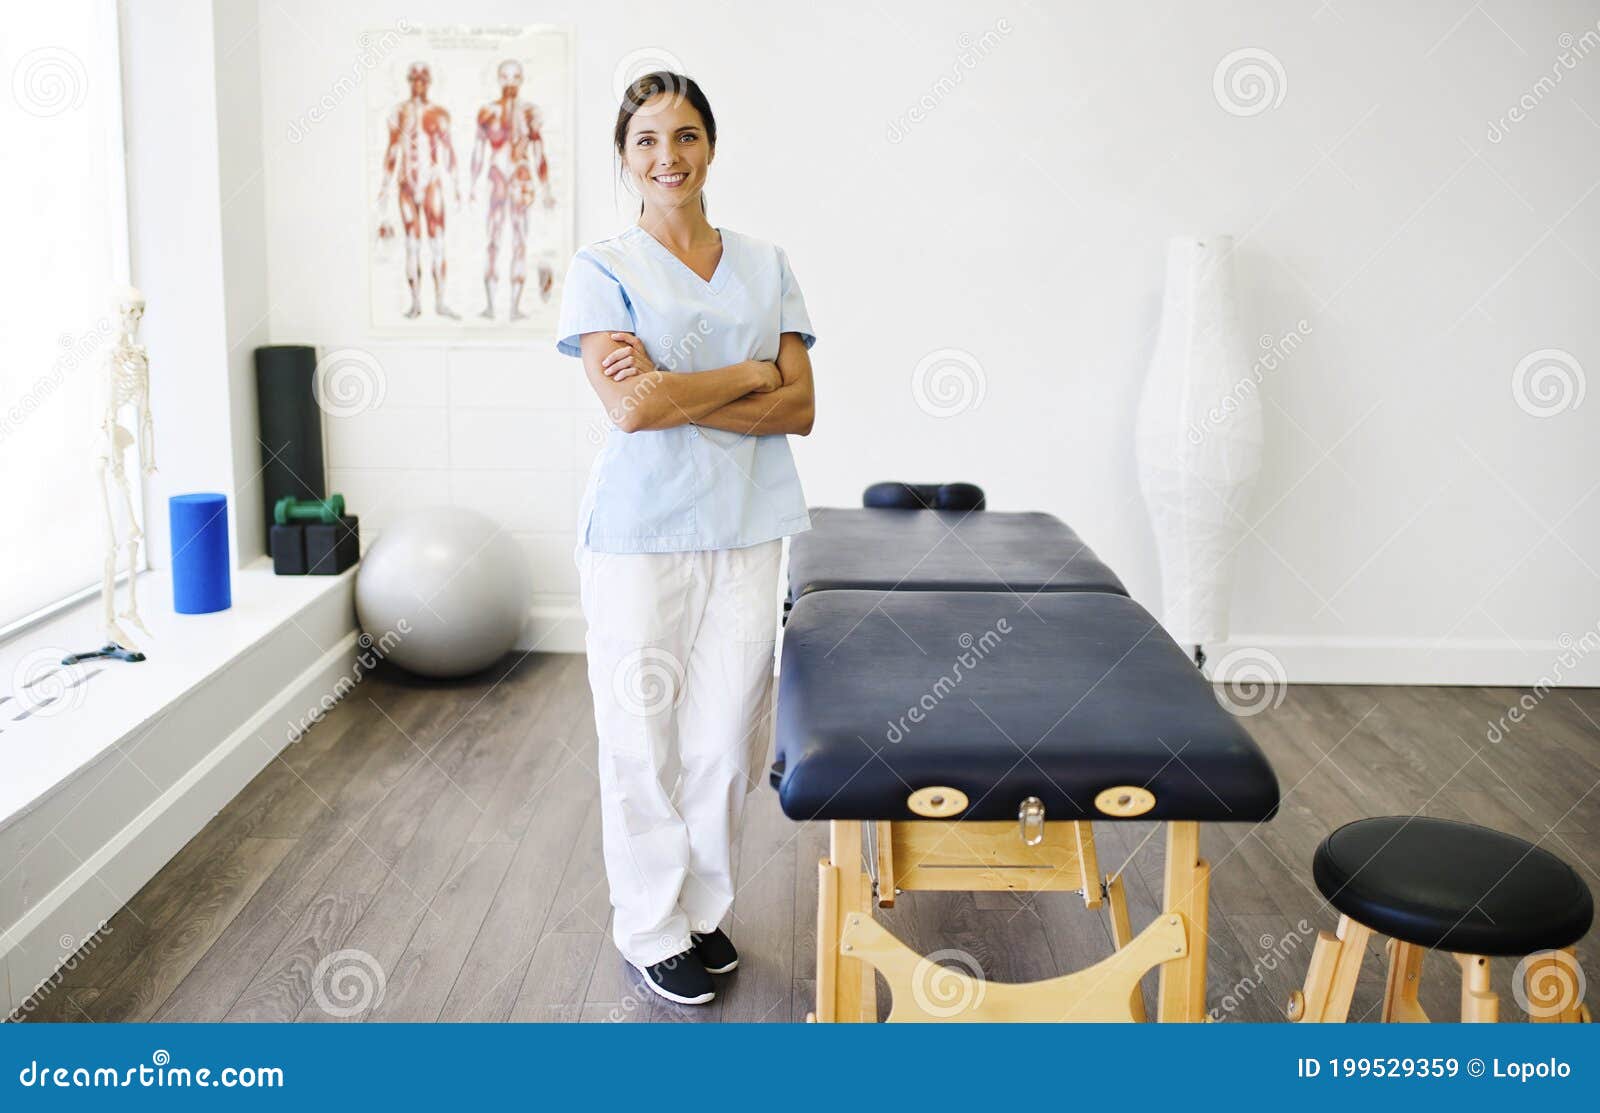 portrait of a physiotherapy woman smiling in uniforme